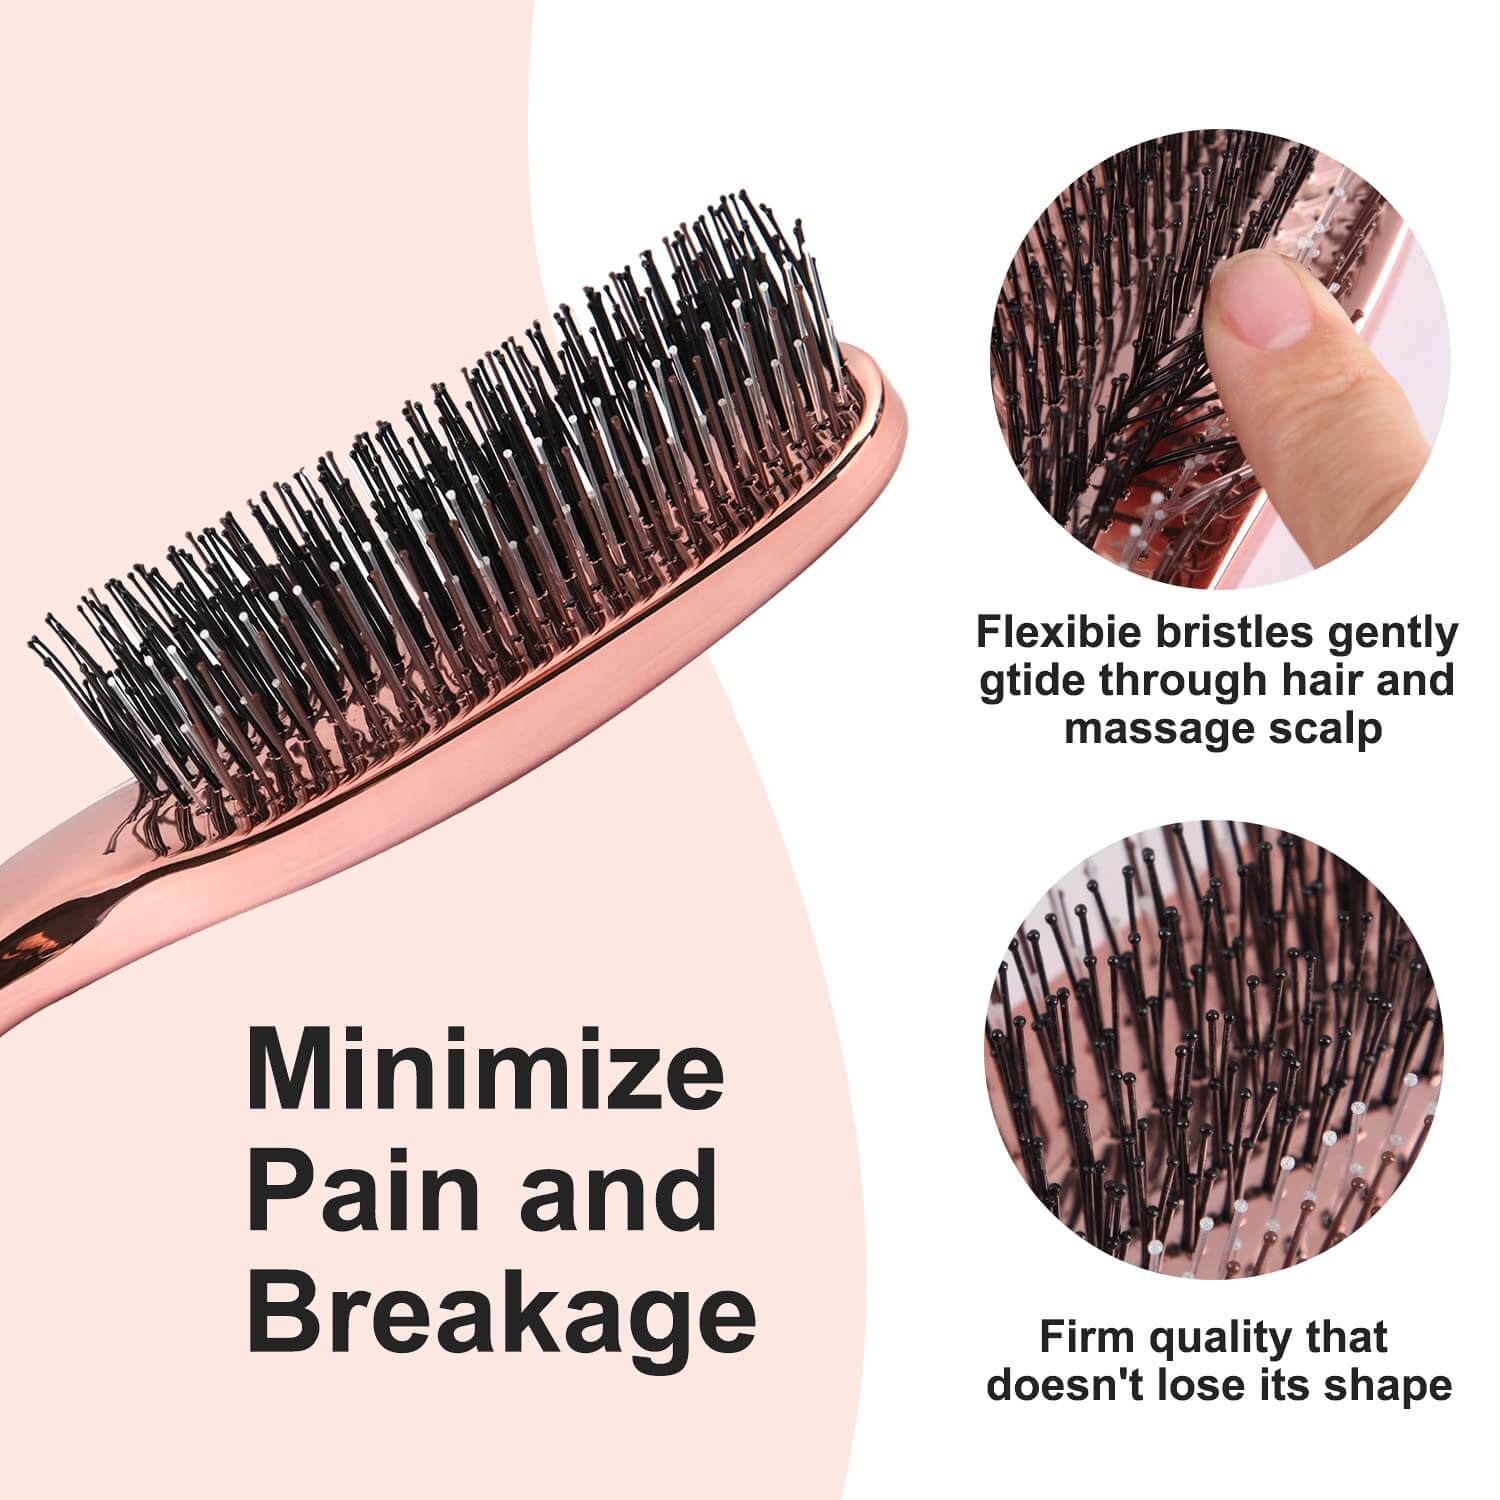 The Scalp Massage Brush and two graphics depicting its flexible bristles and firm quality.